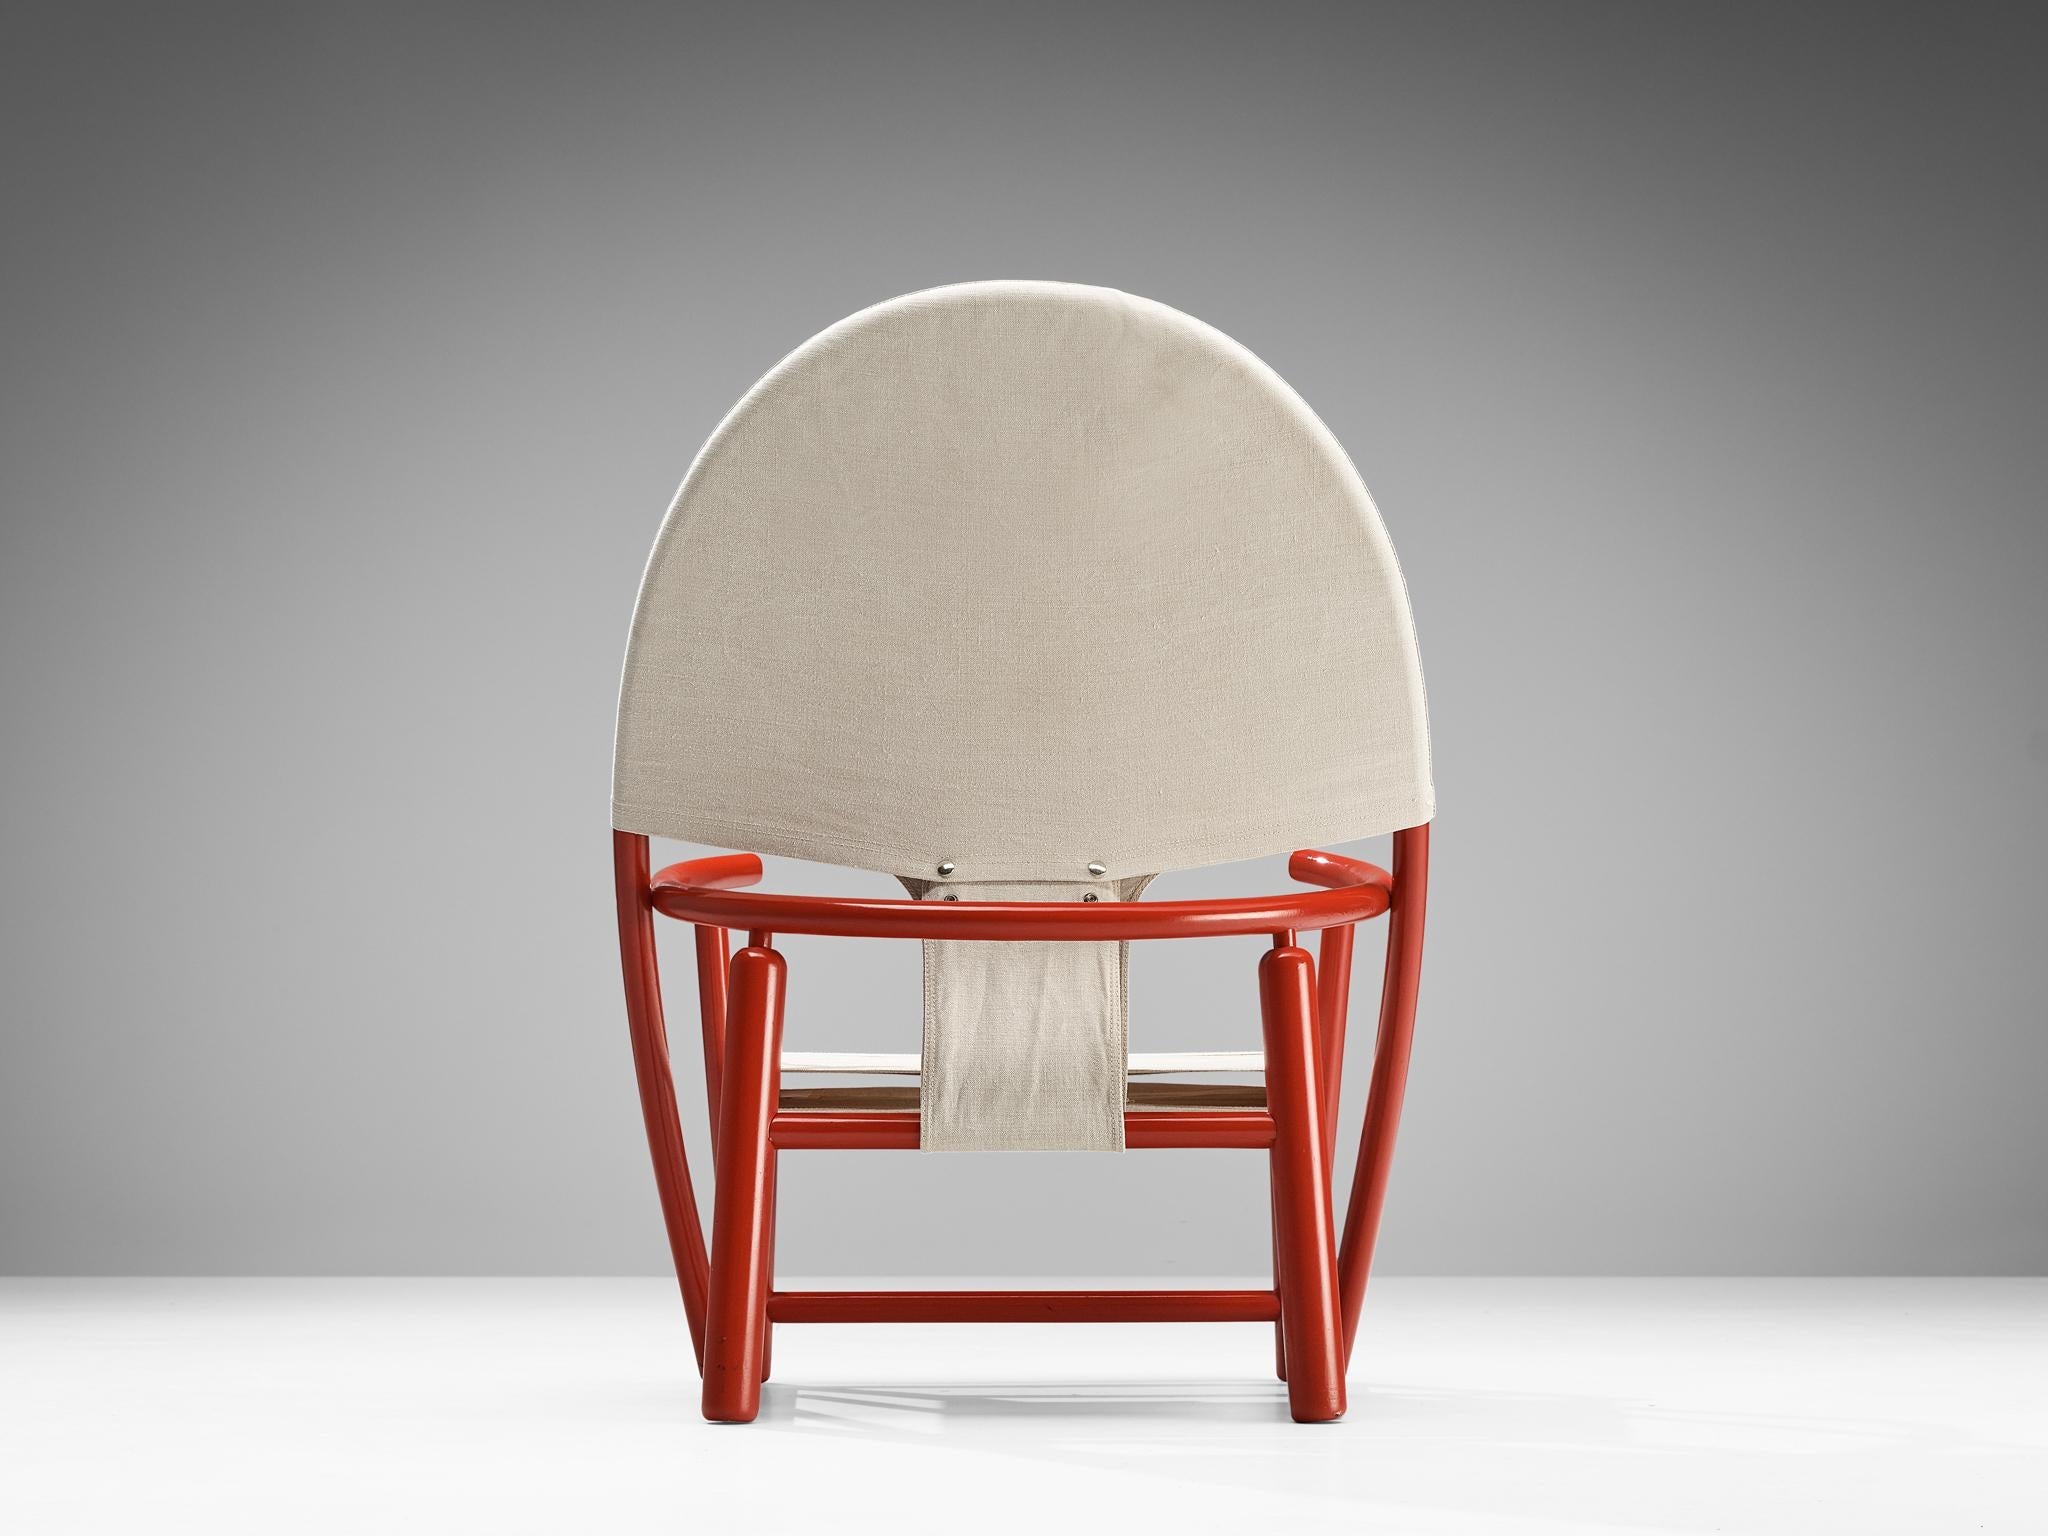 Werther Toffoloni & Piero Palange Pair of ‘Hoop’ Red Chairs in Canvas